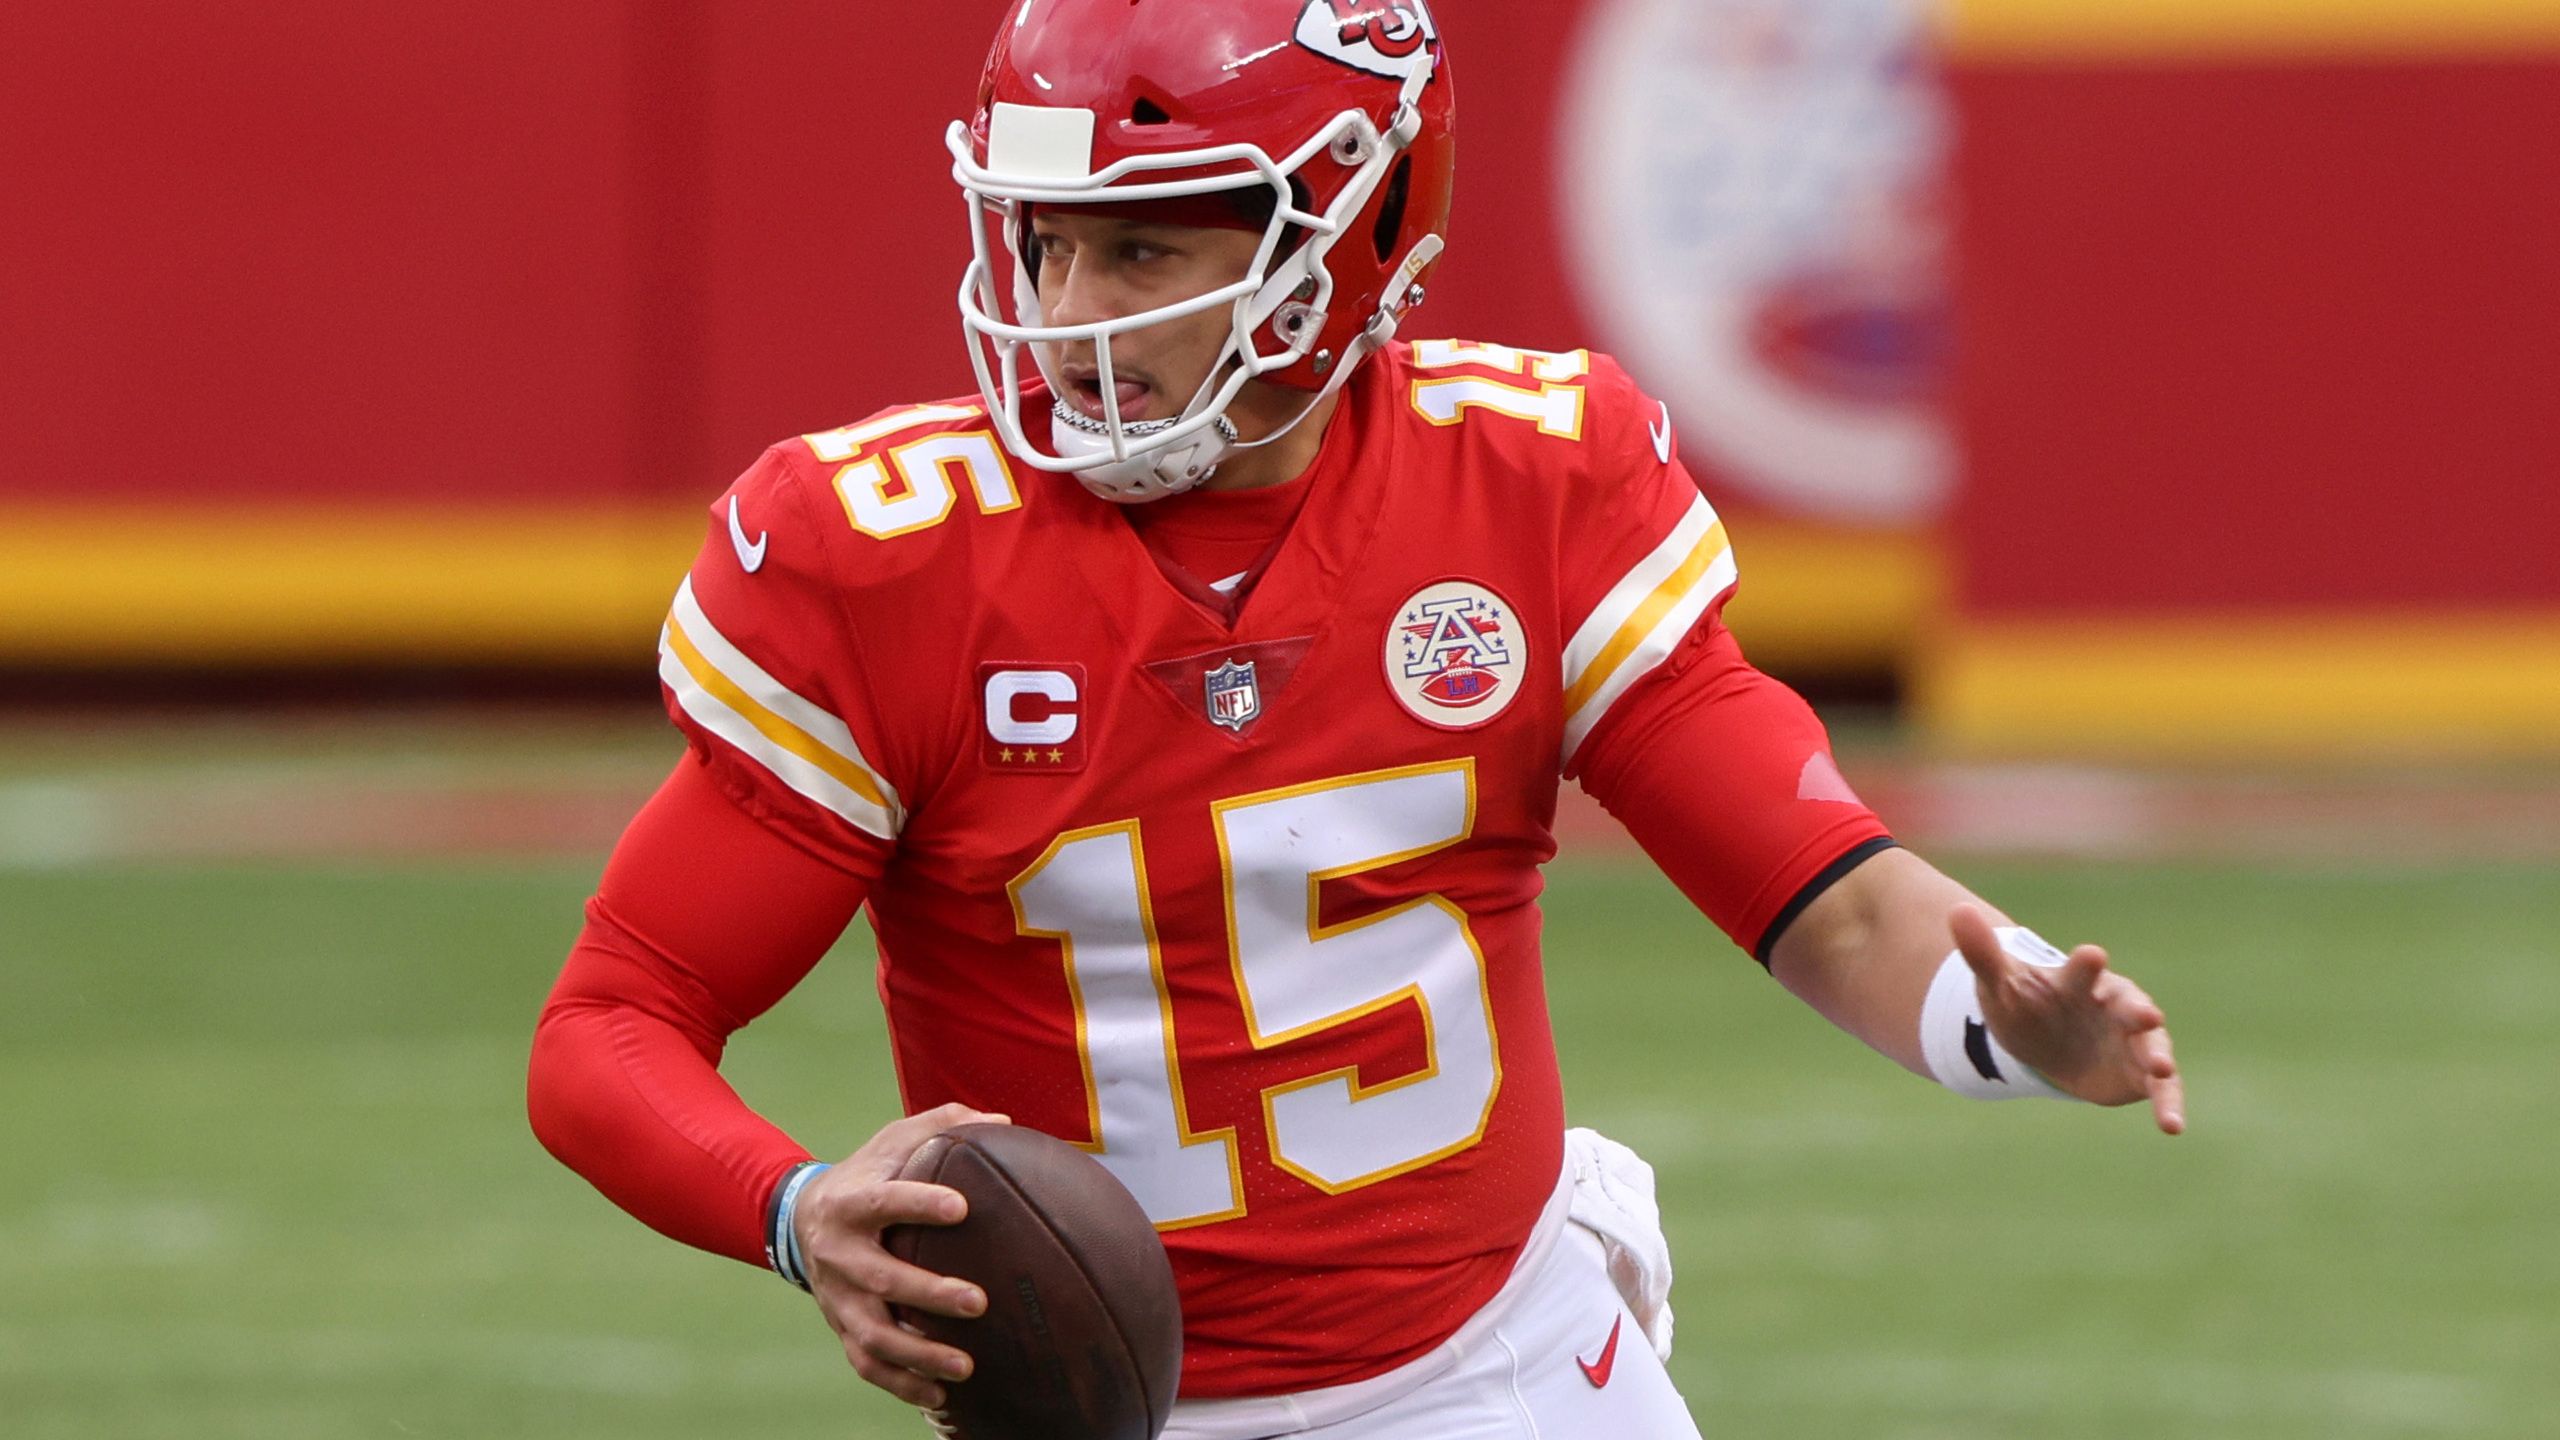 Super matchup between QBs Mahomes, Brady for NFL title